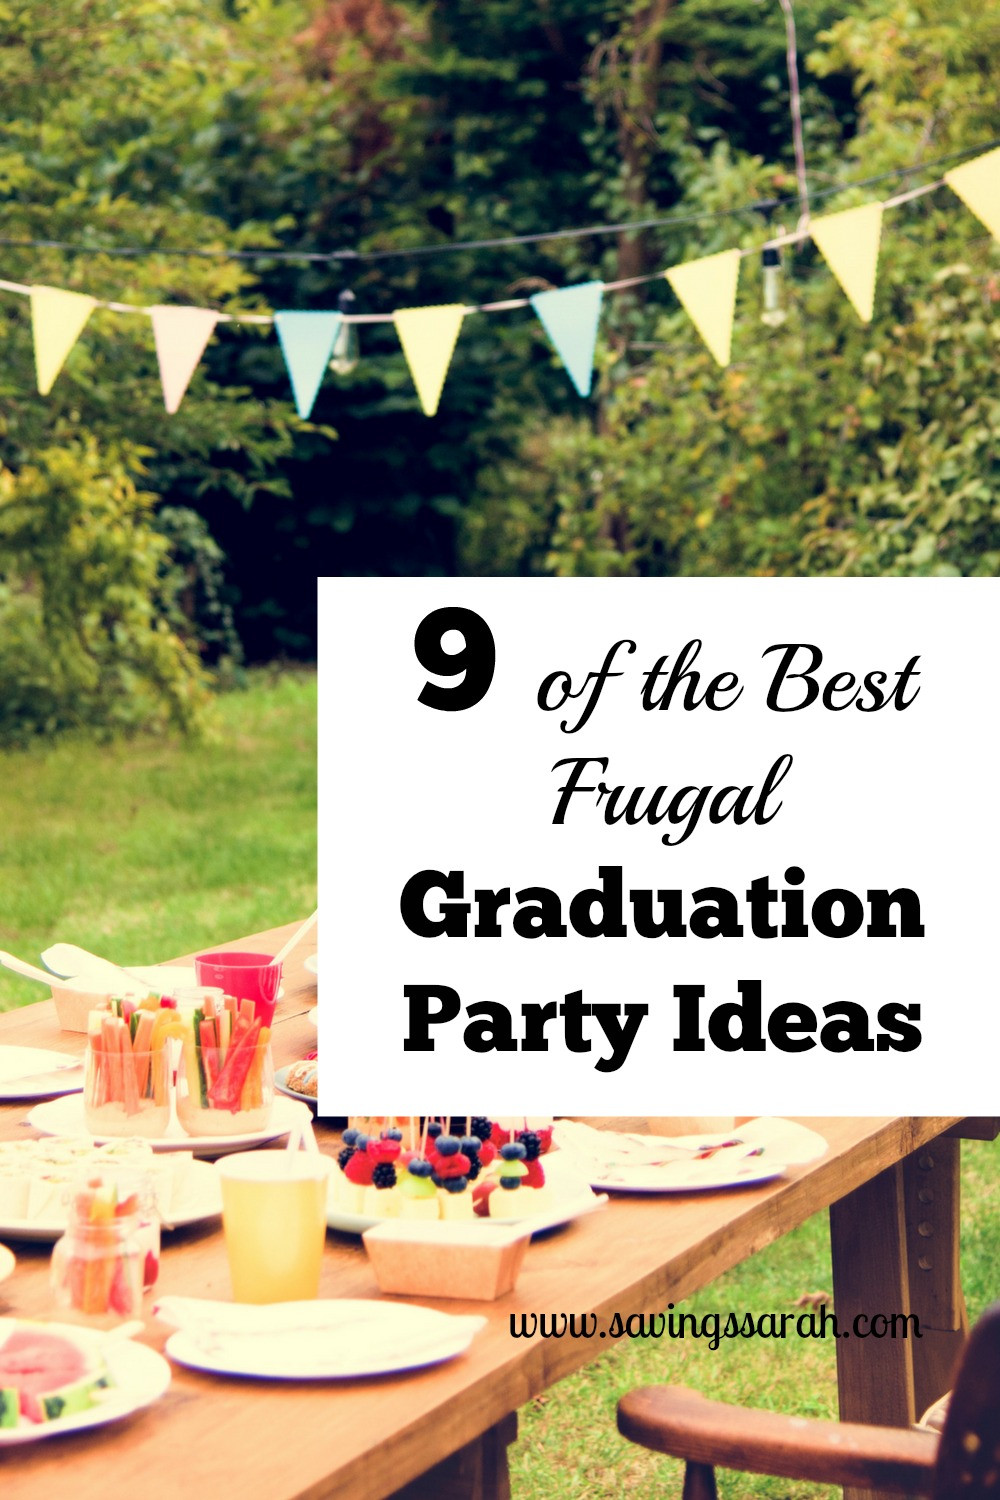 Party Ideas For Graduation
 9 the Best Frugal Graduation Party Ideas Earning and